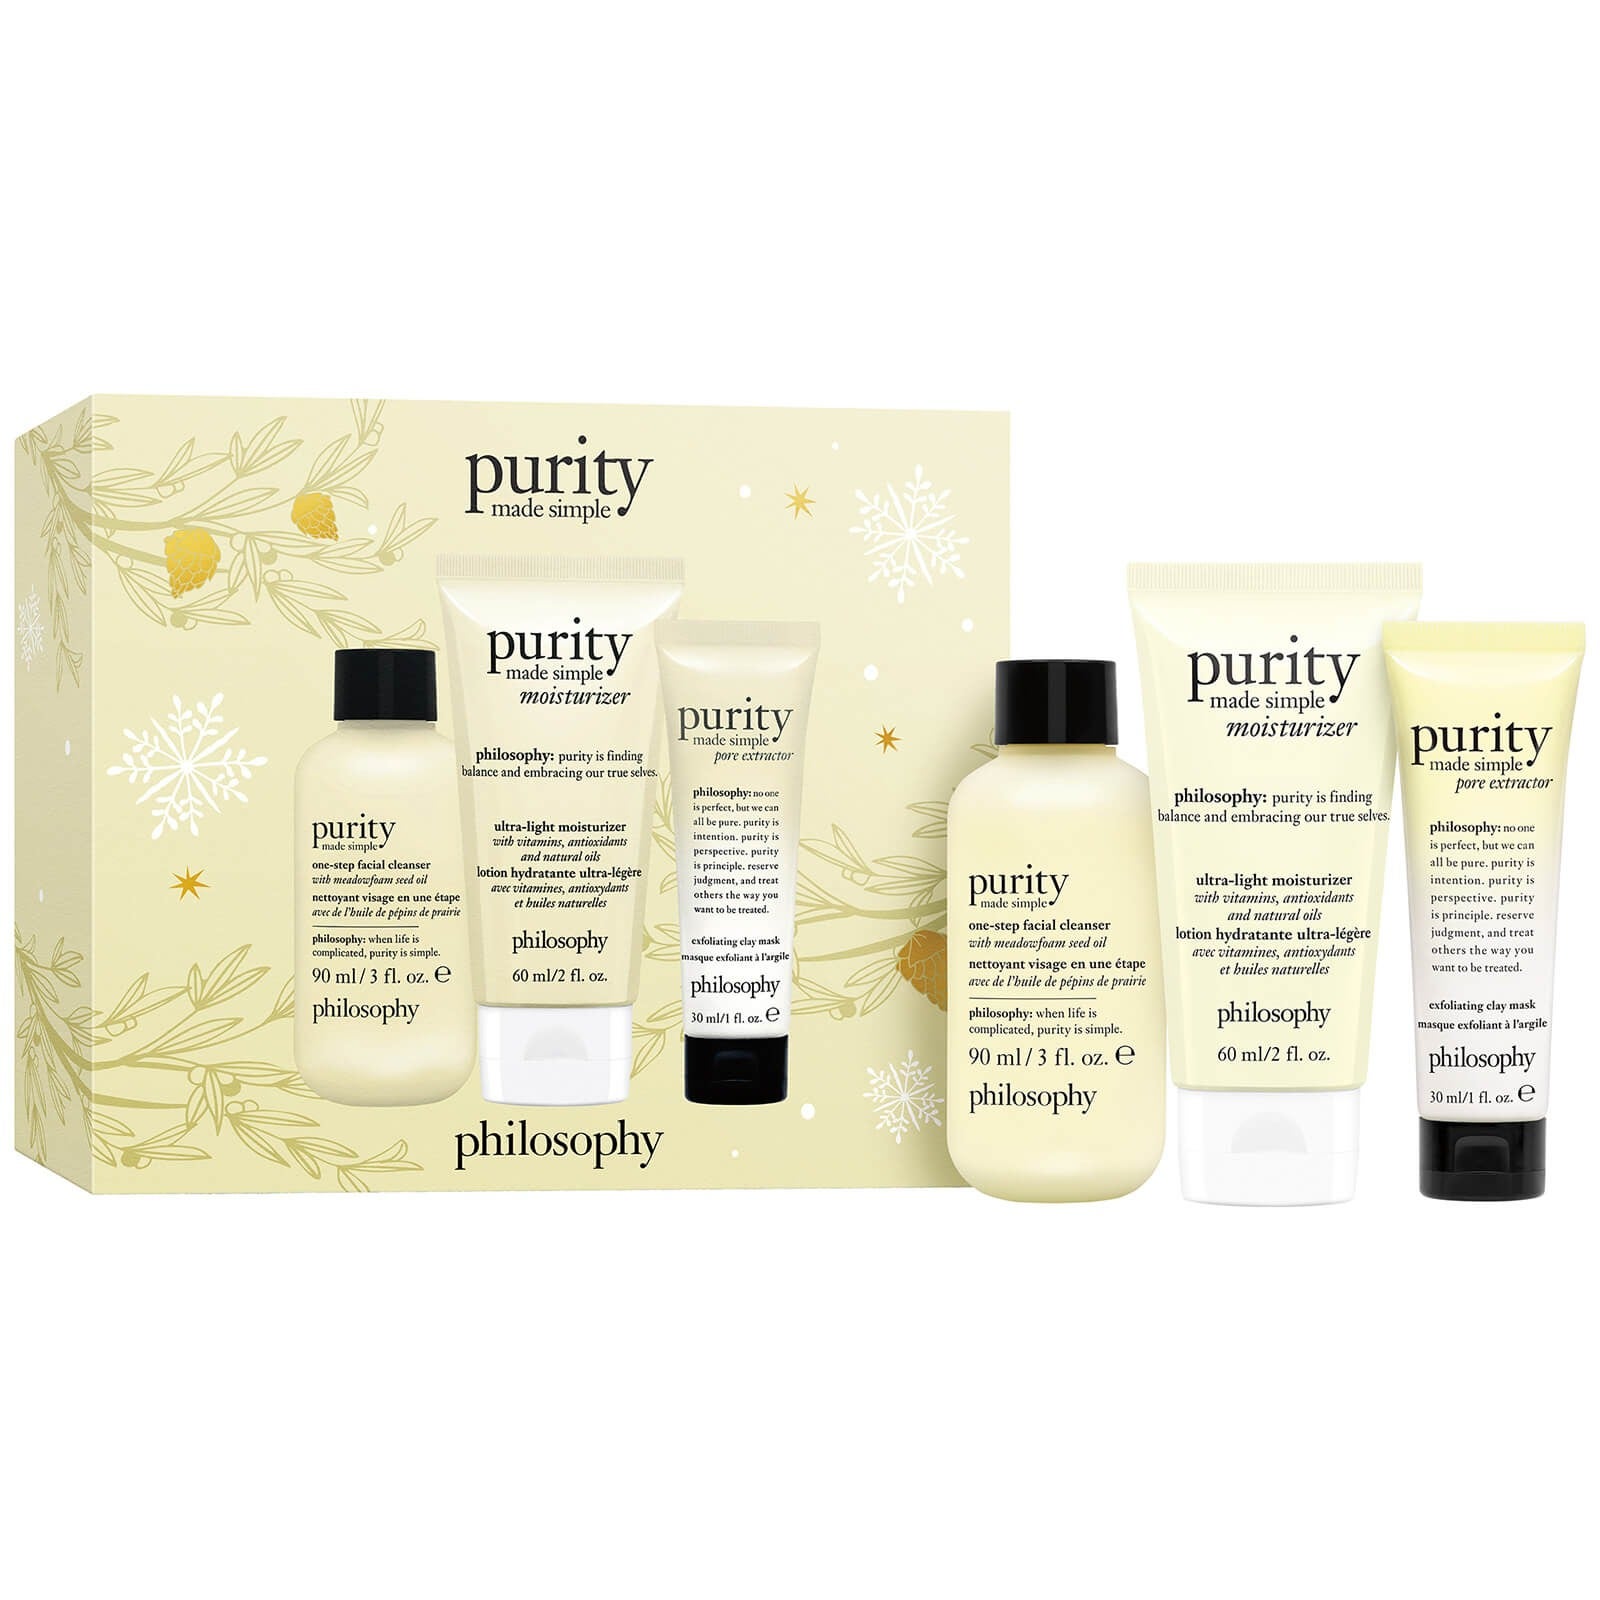 Philosophy + philosophy Purity Made Simple Holiday Gift Set